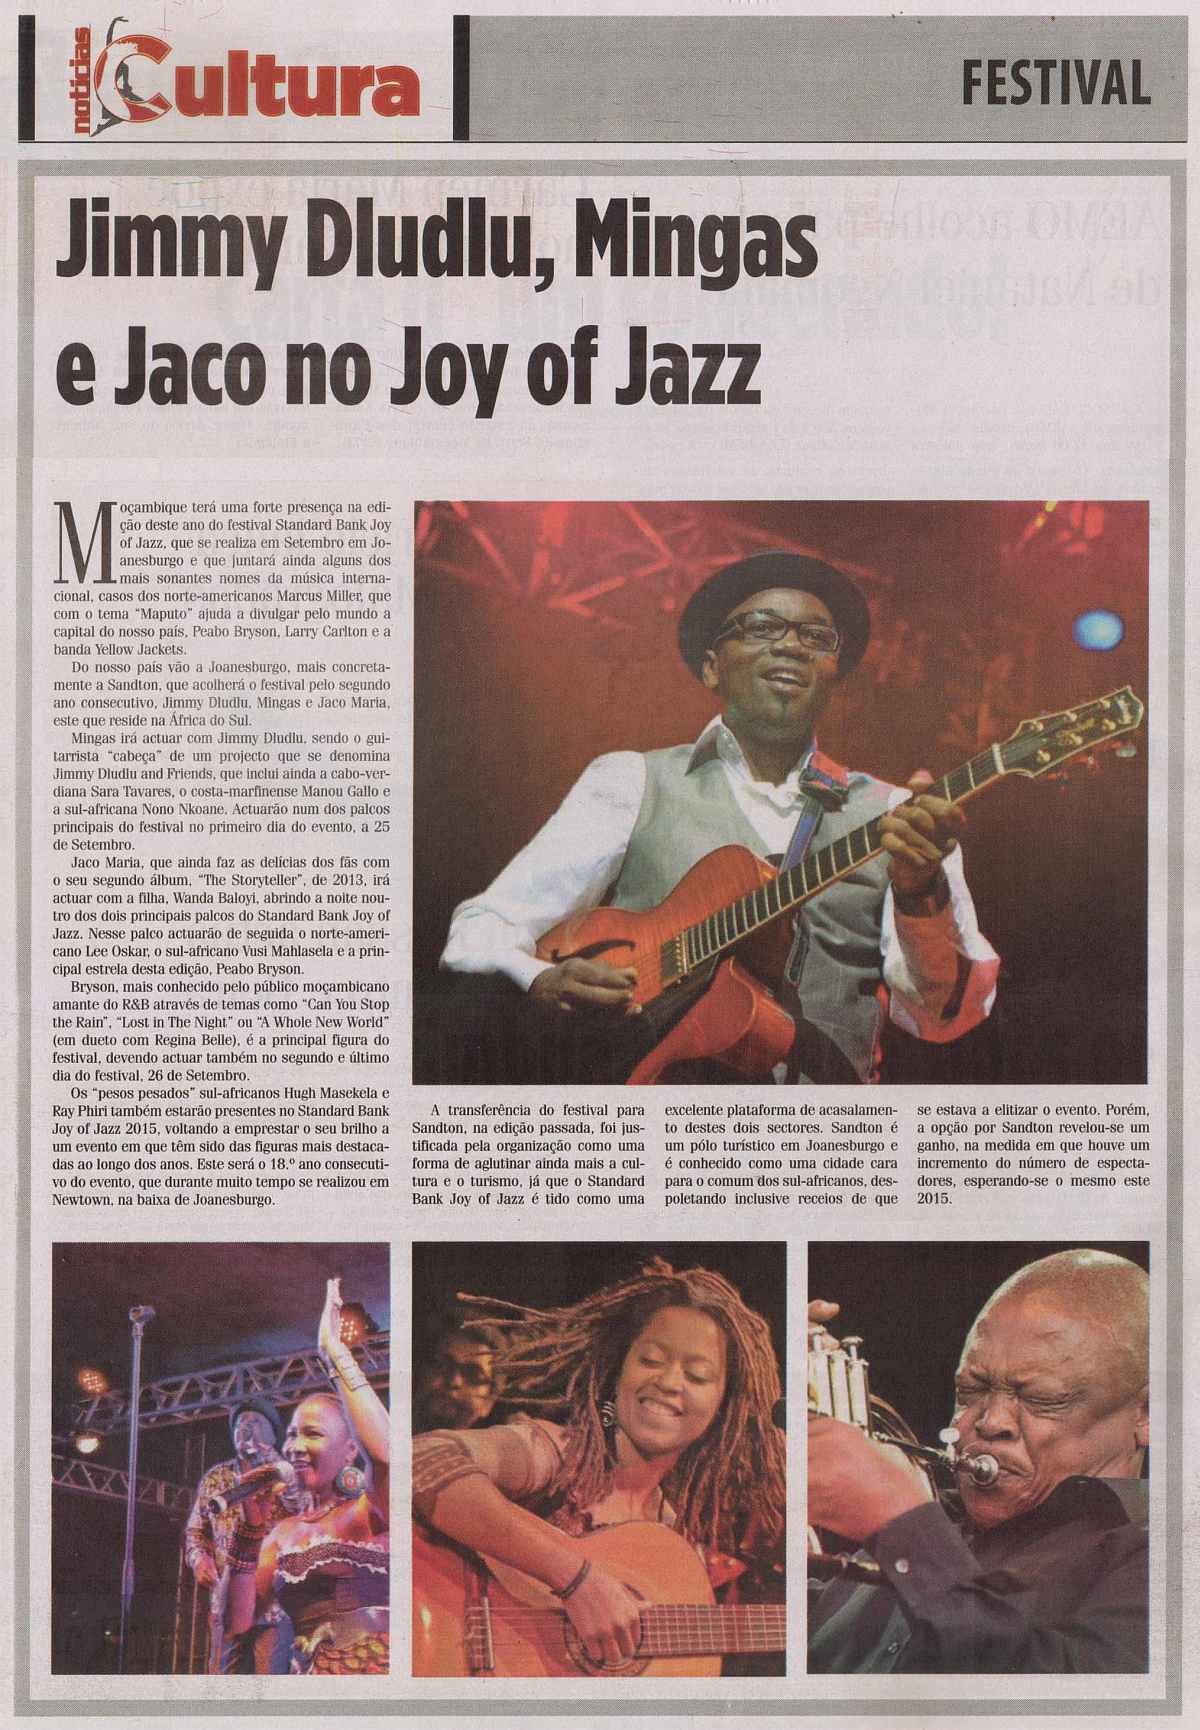 'Noticias-Cultura', July 29, 2015, Page 8: 'Joy of Jazz' Festival in Johannesburg, South Africa, September, 2015